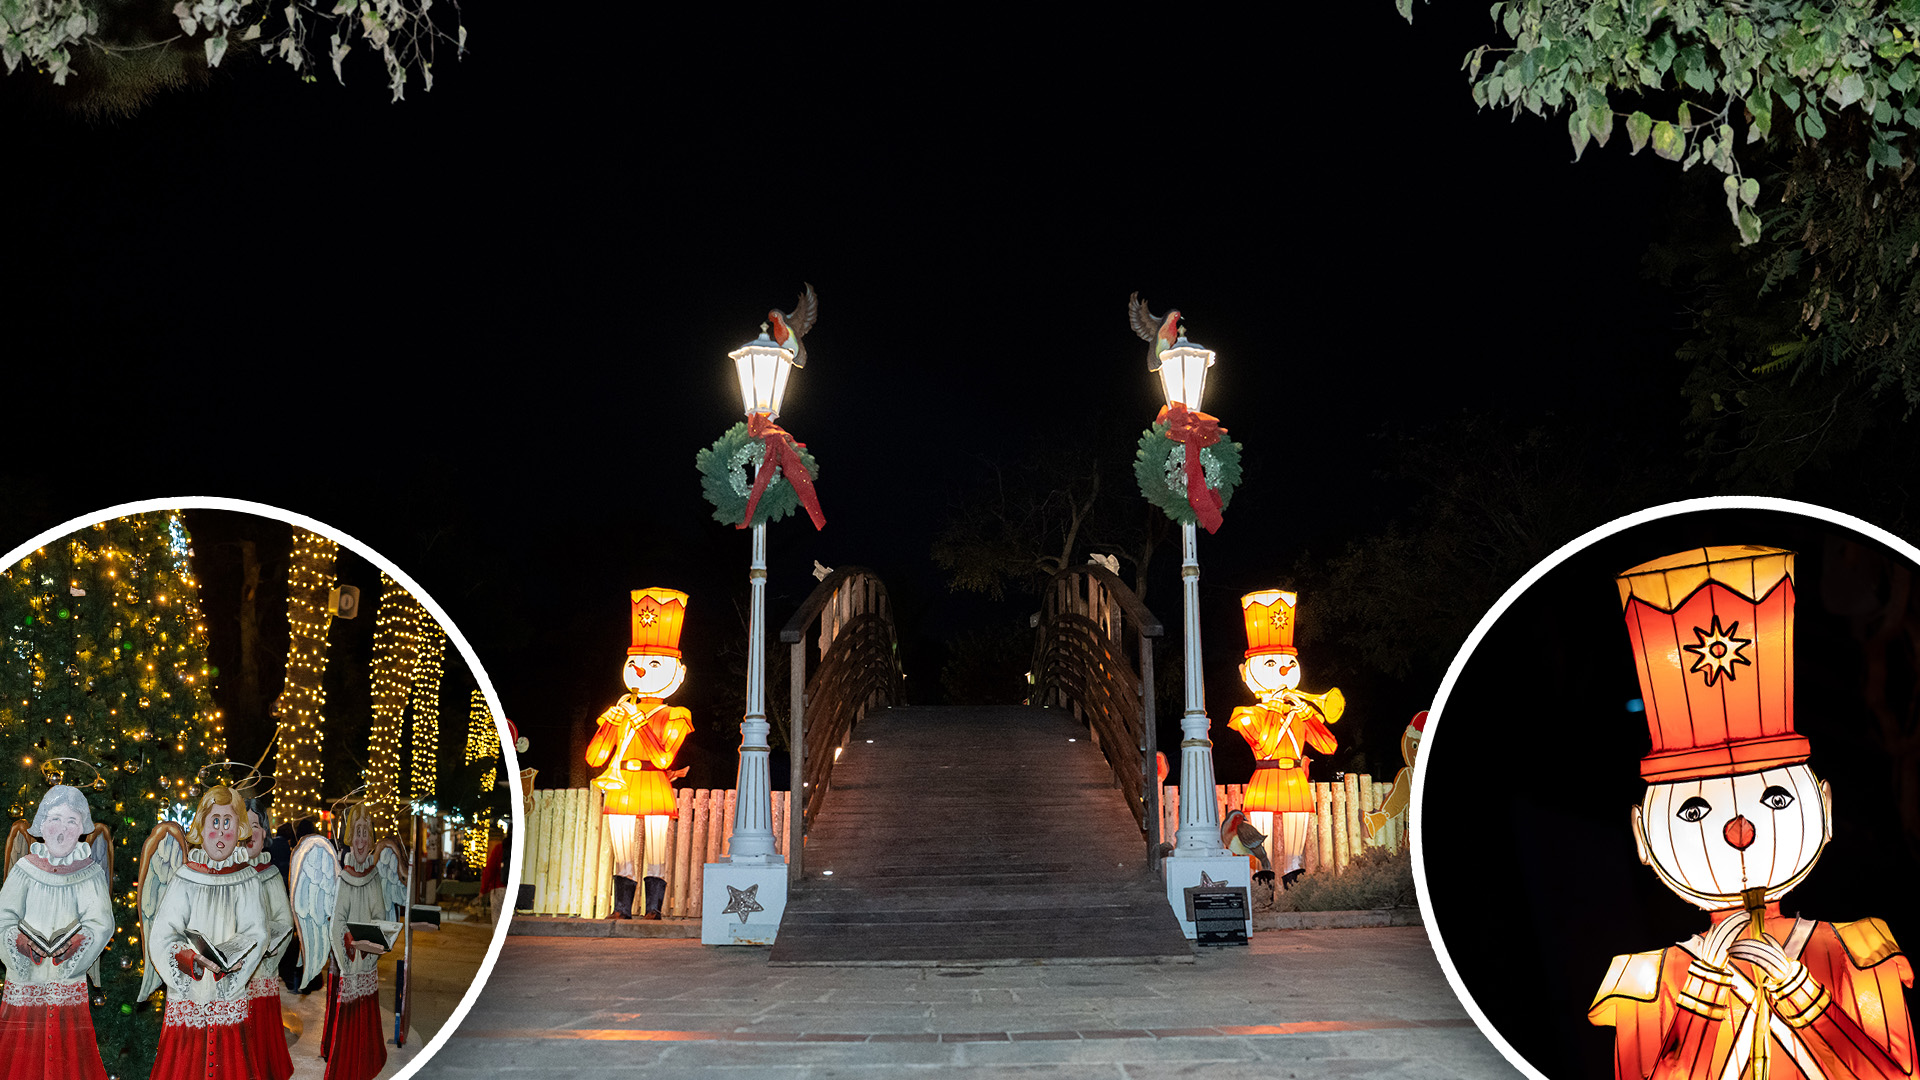 Experience Christmas In Gozo Like Never Before With Villa Rundle Illuminated!